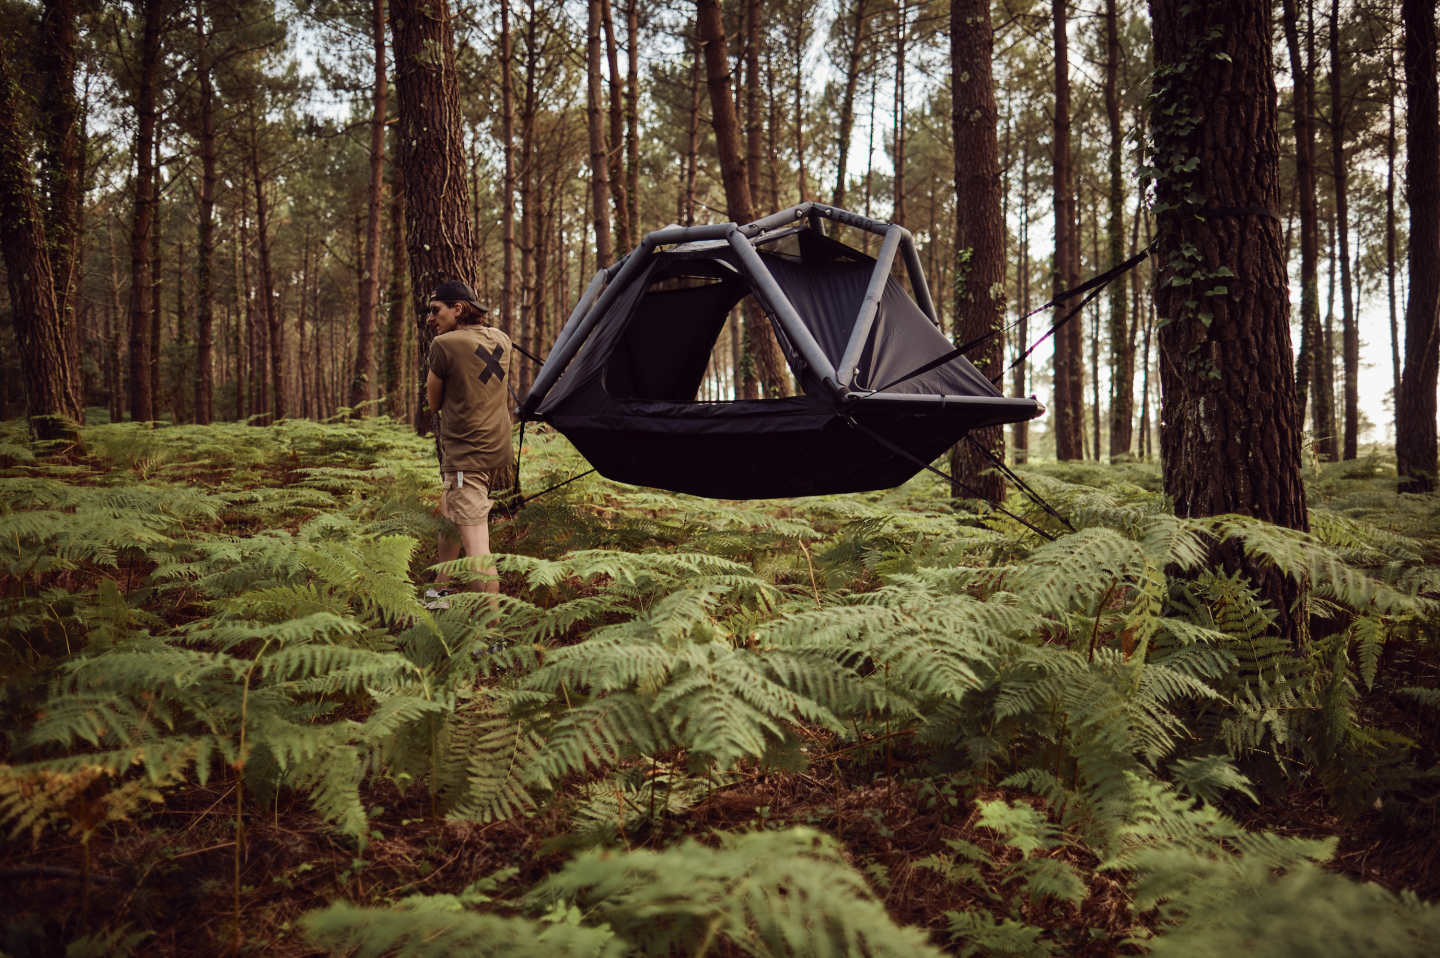 With the available cam straps, the Ark becomes a hovering sleeping pod